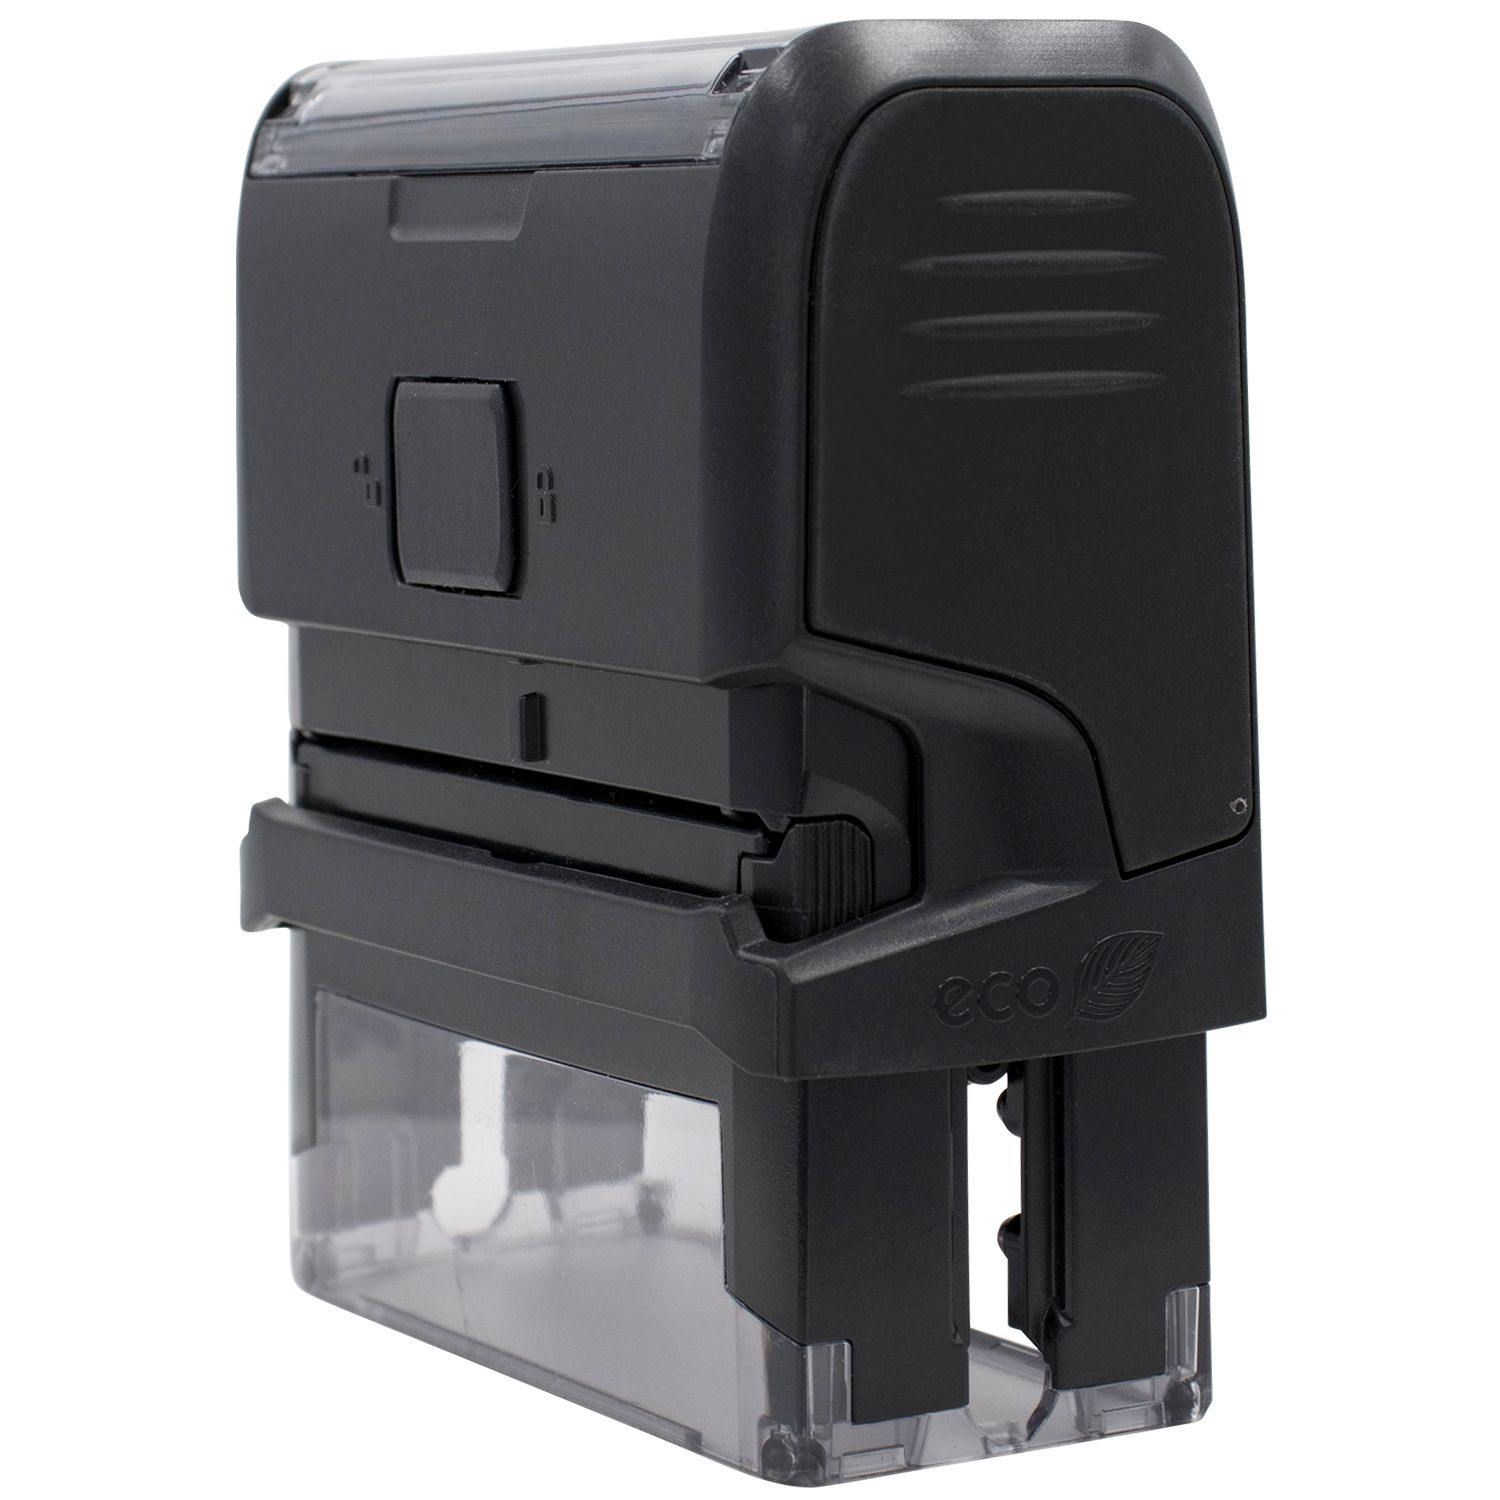 Side View of Large Self Inking Blue Shield Stamp at an Angle